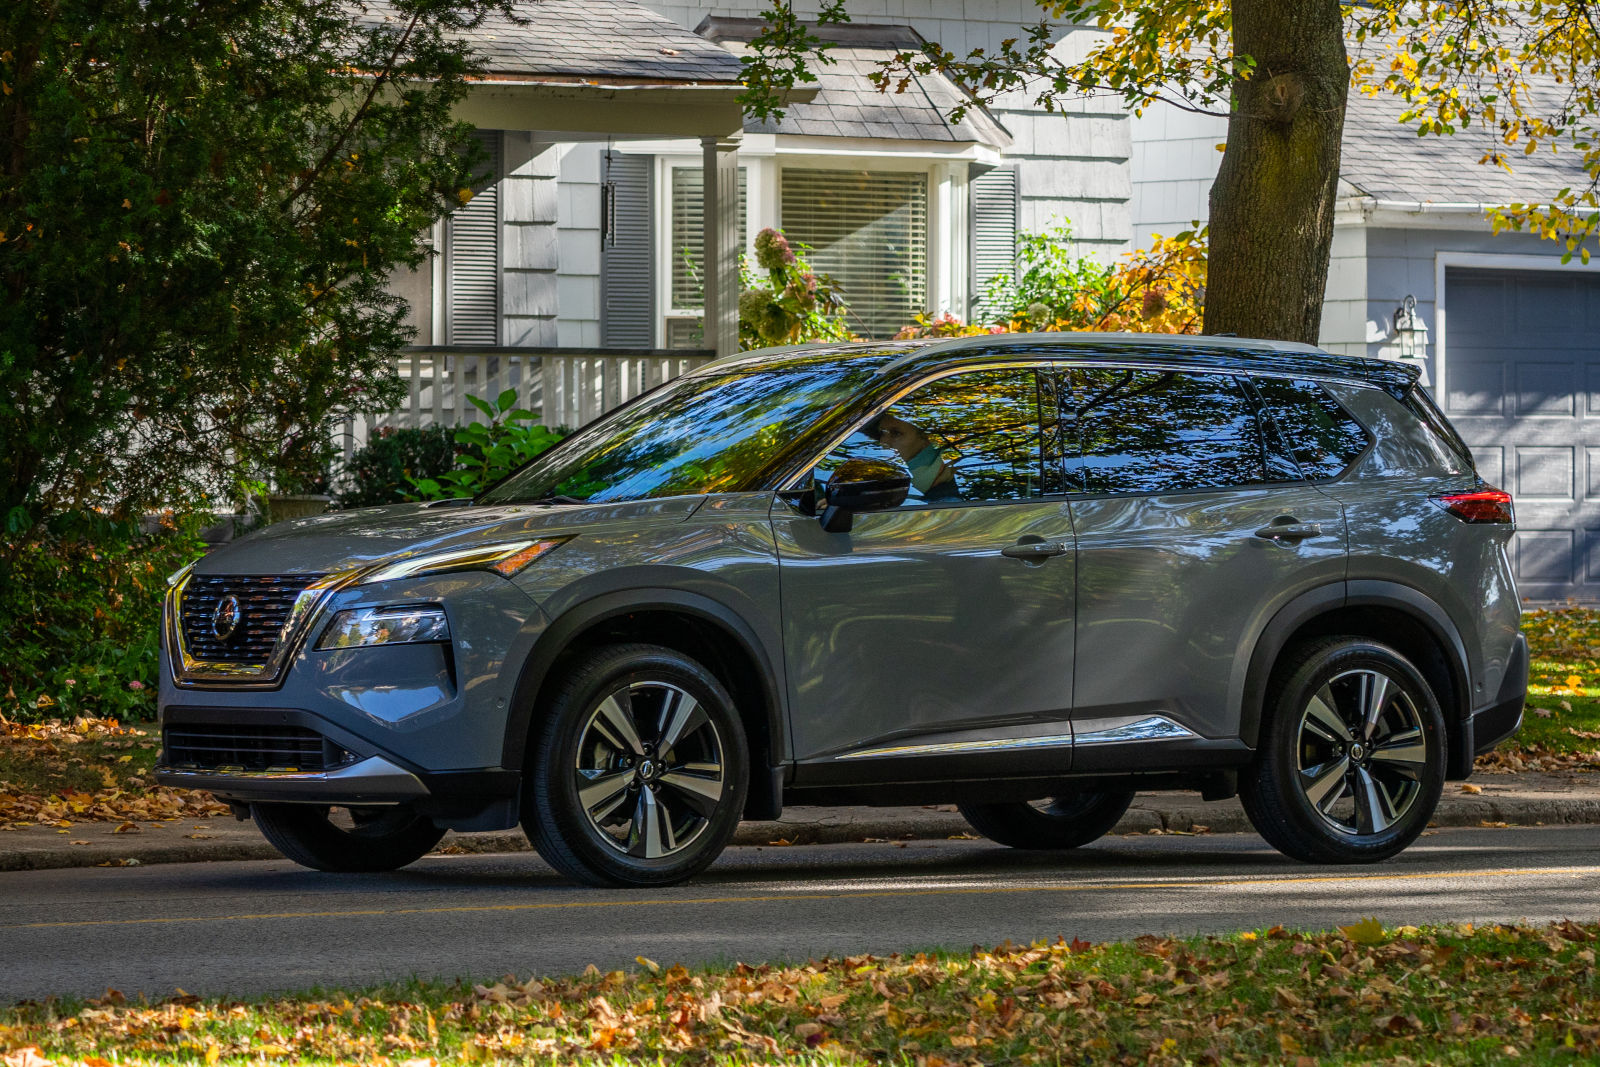 How to Choose Between the 2023 Nissan Rogue and the 2023 Nissan Pathfinder?